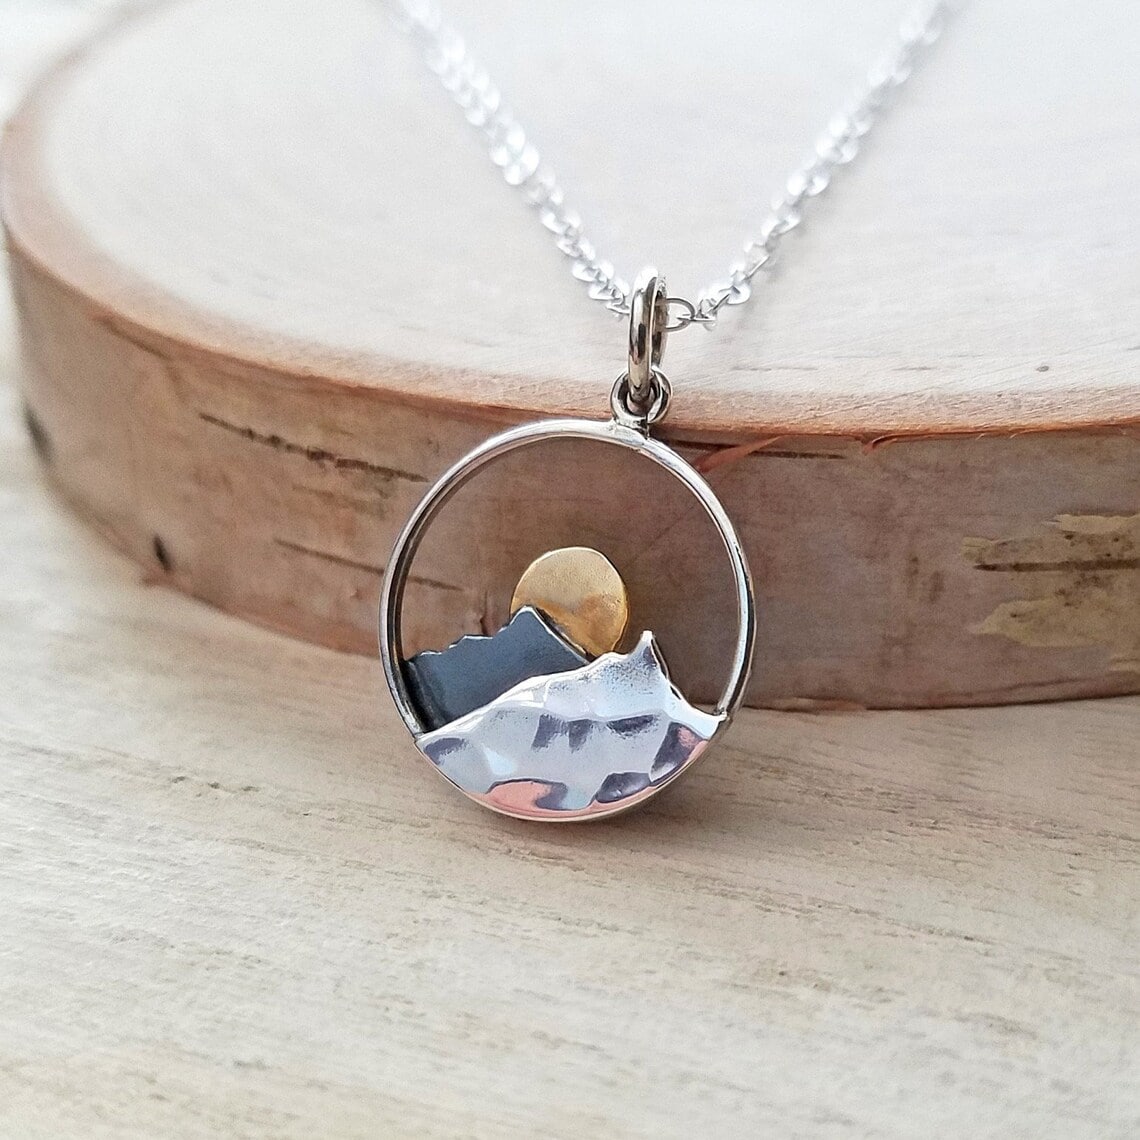 Sterling Silver Mountain Necklace